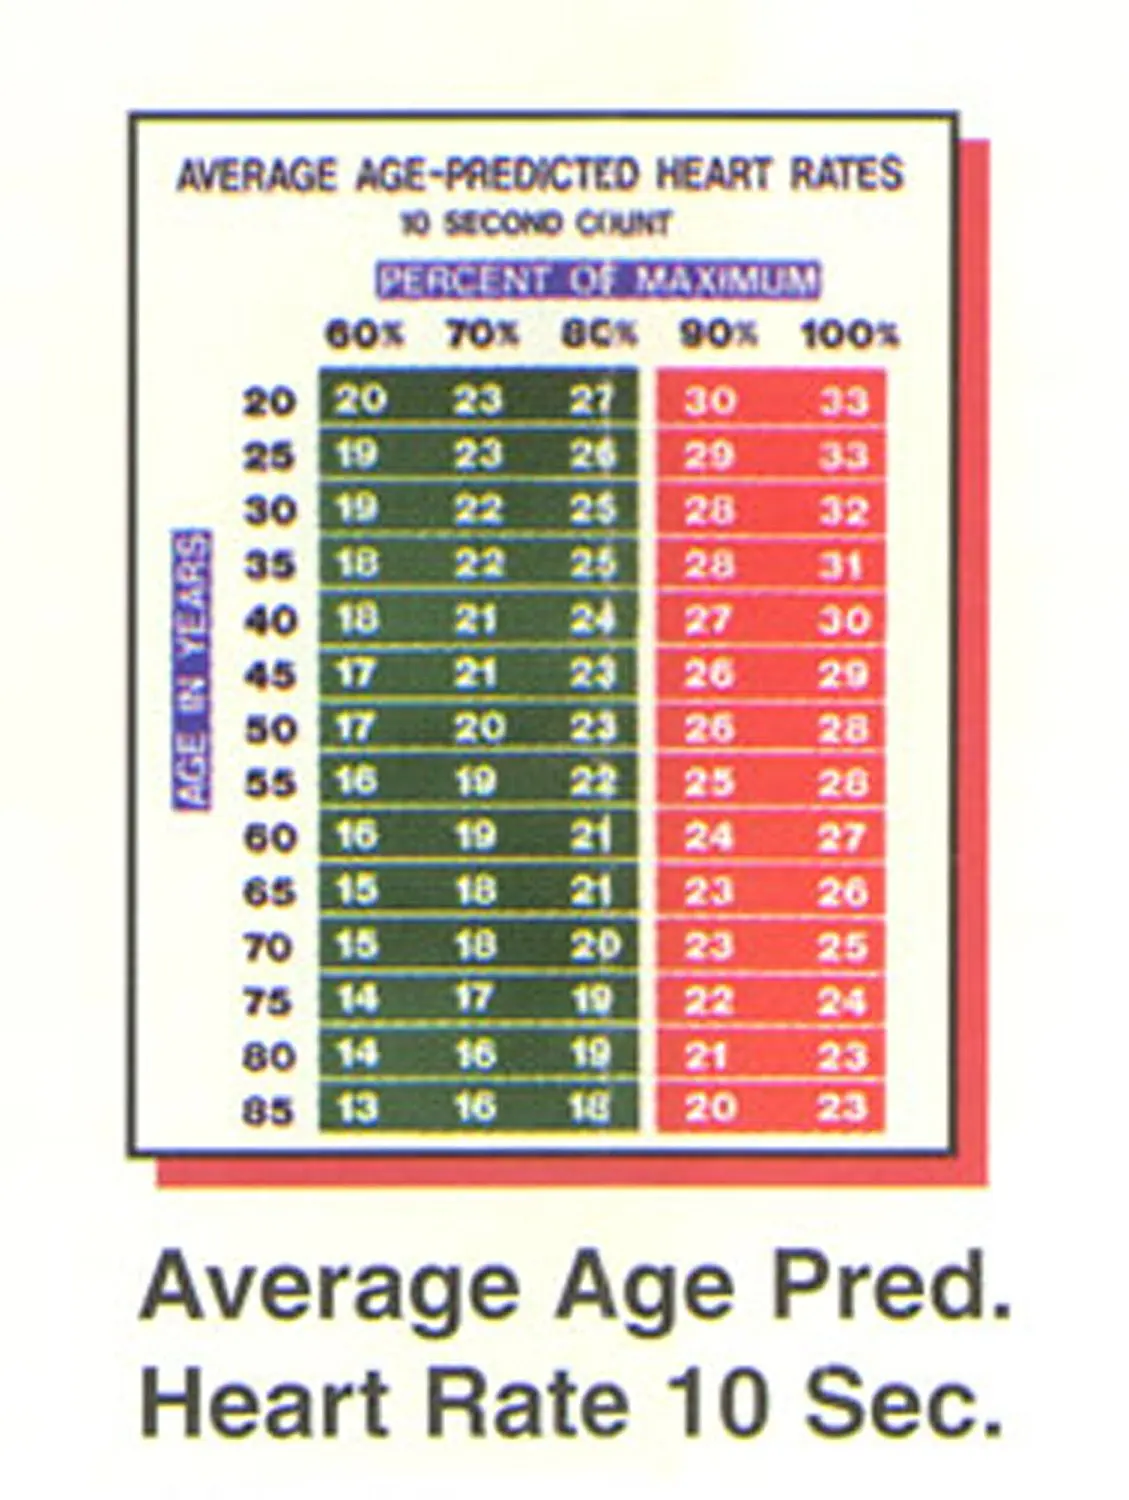 Pulse Rate Chart By Age